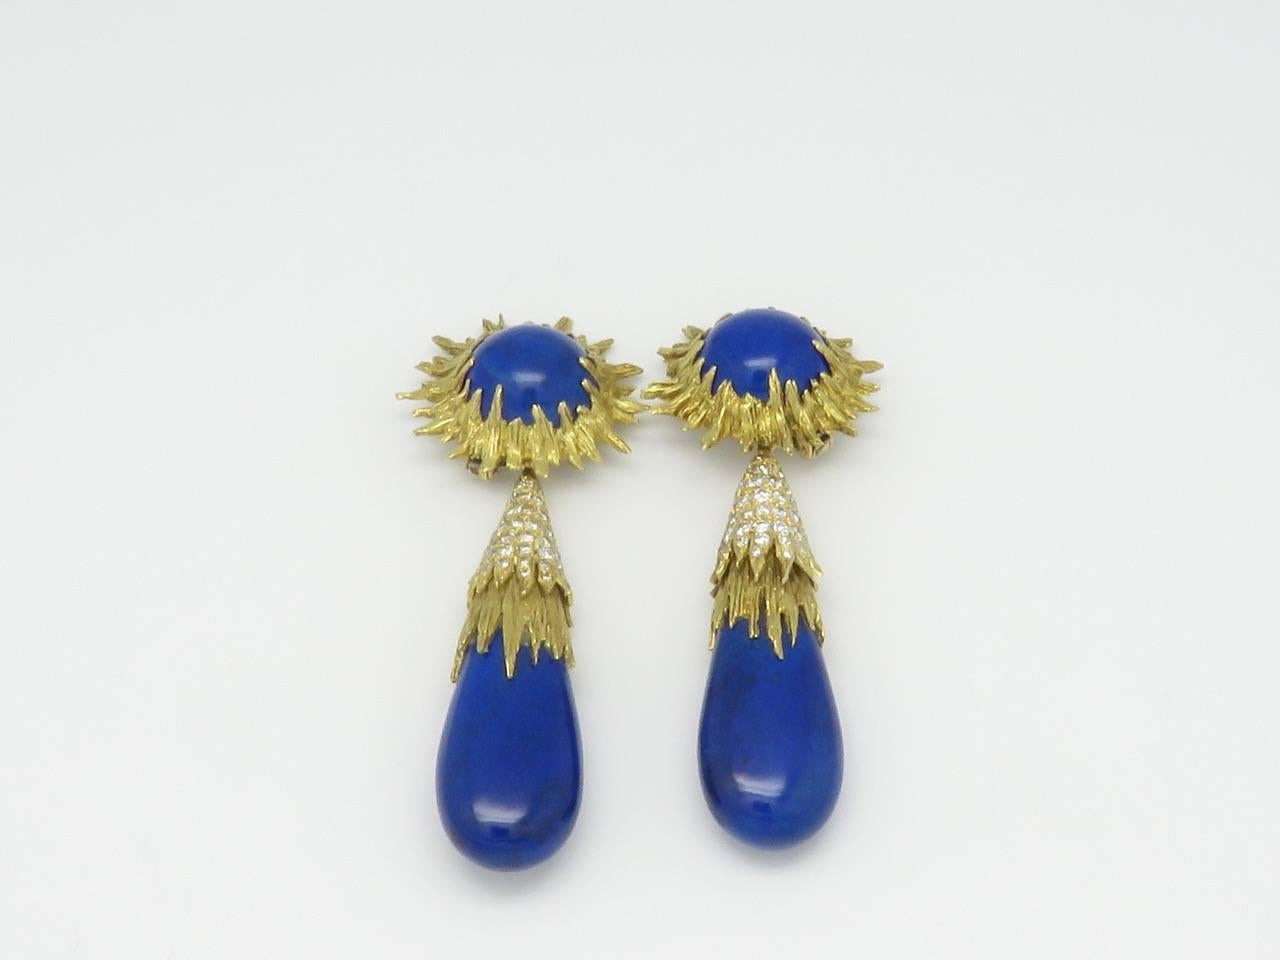 A Beautiful vintage set, composed by Lapis Lazuli necklace and earrings within brilliant cut diamonds.
Necklace mounted 18k White and Yellow gold.
Earrings mounted 18k yellow gold. 
French assay marks for gold.
Signed CHAUMET
Circa